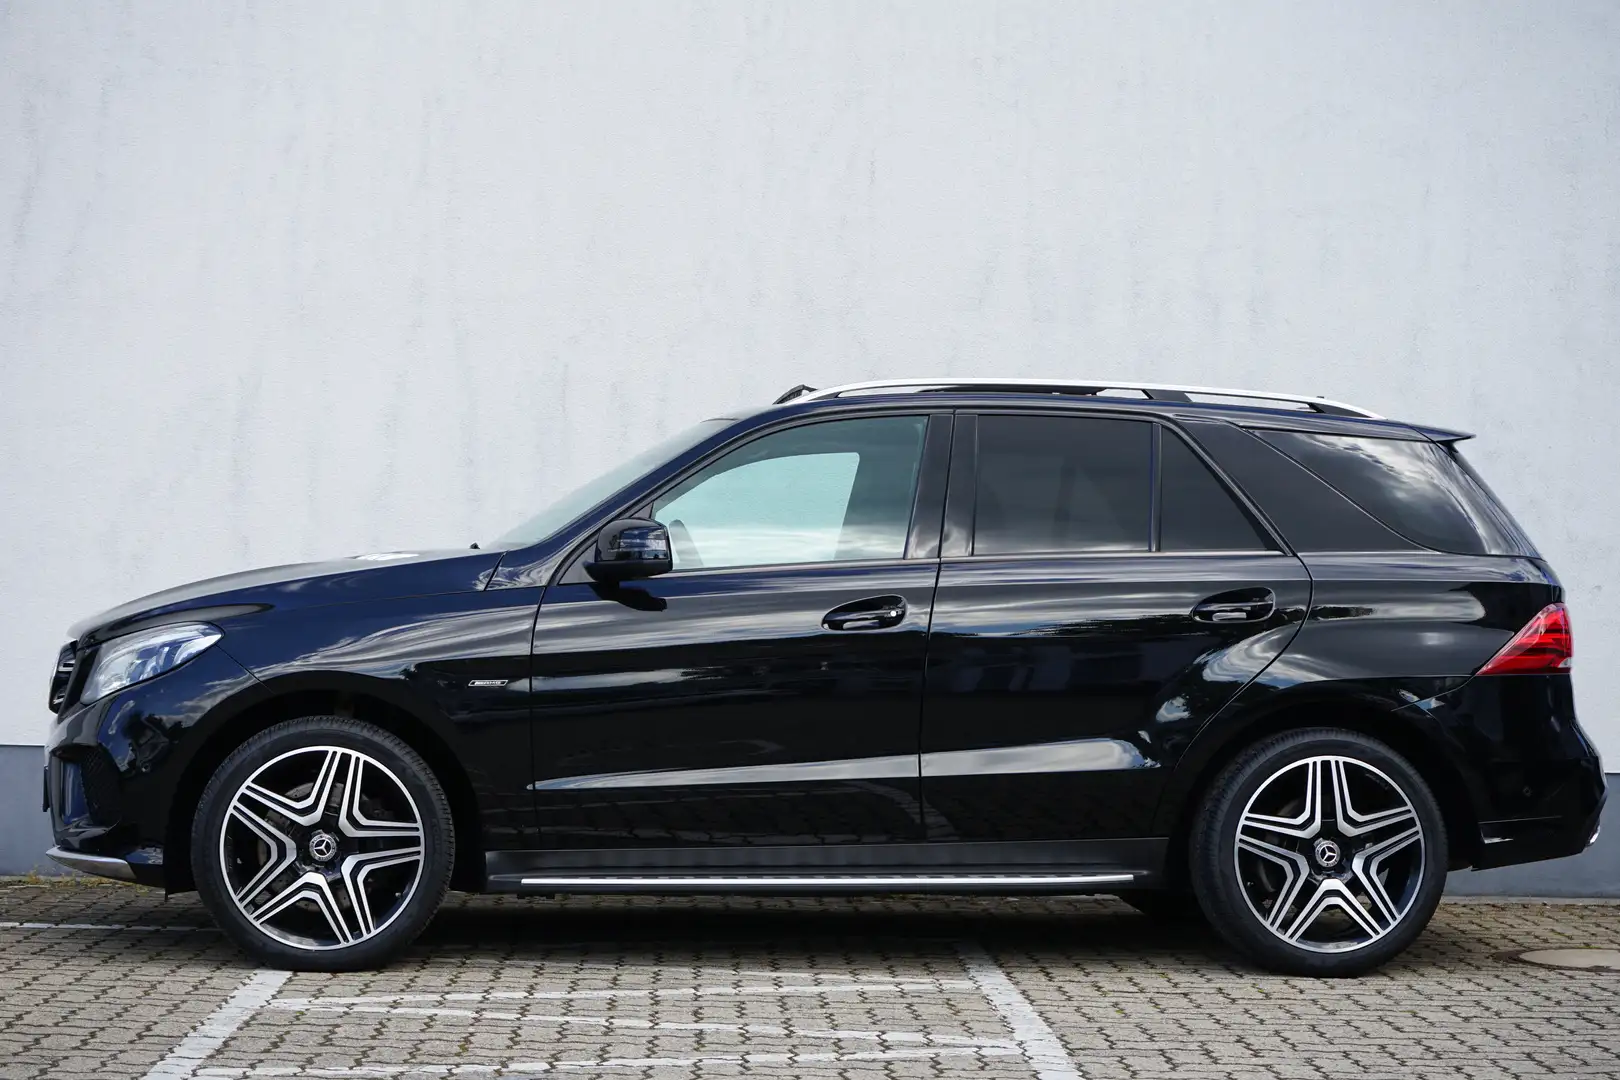 Mercedes-Benz GLE 450 4MATIC*21 Zoll*Panorama*LED ILS*Standheizung*Voll Black - 2